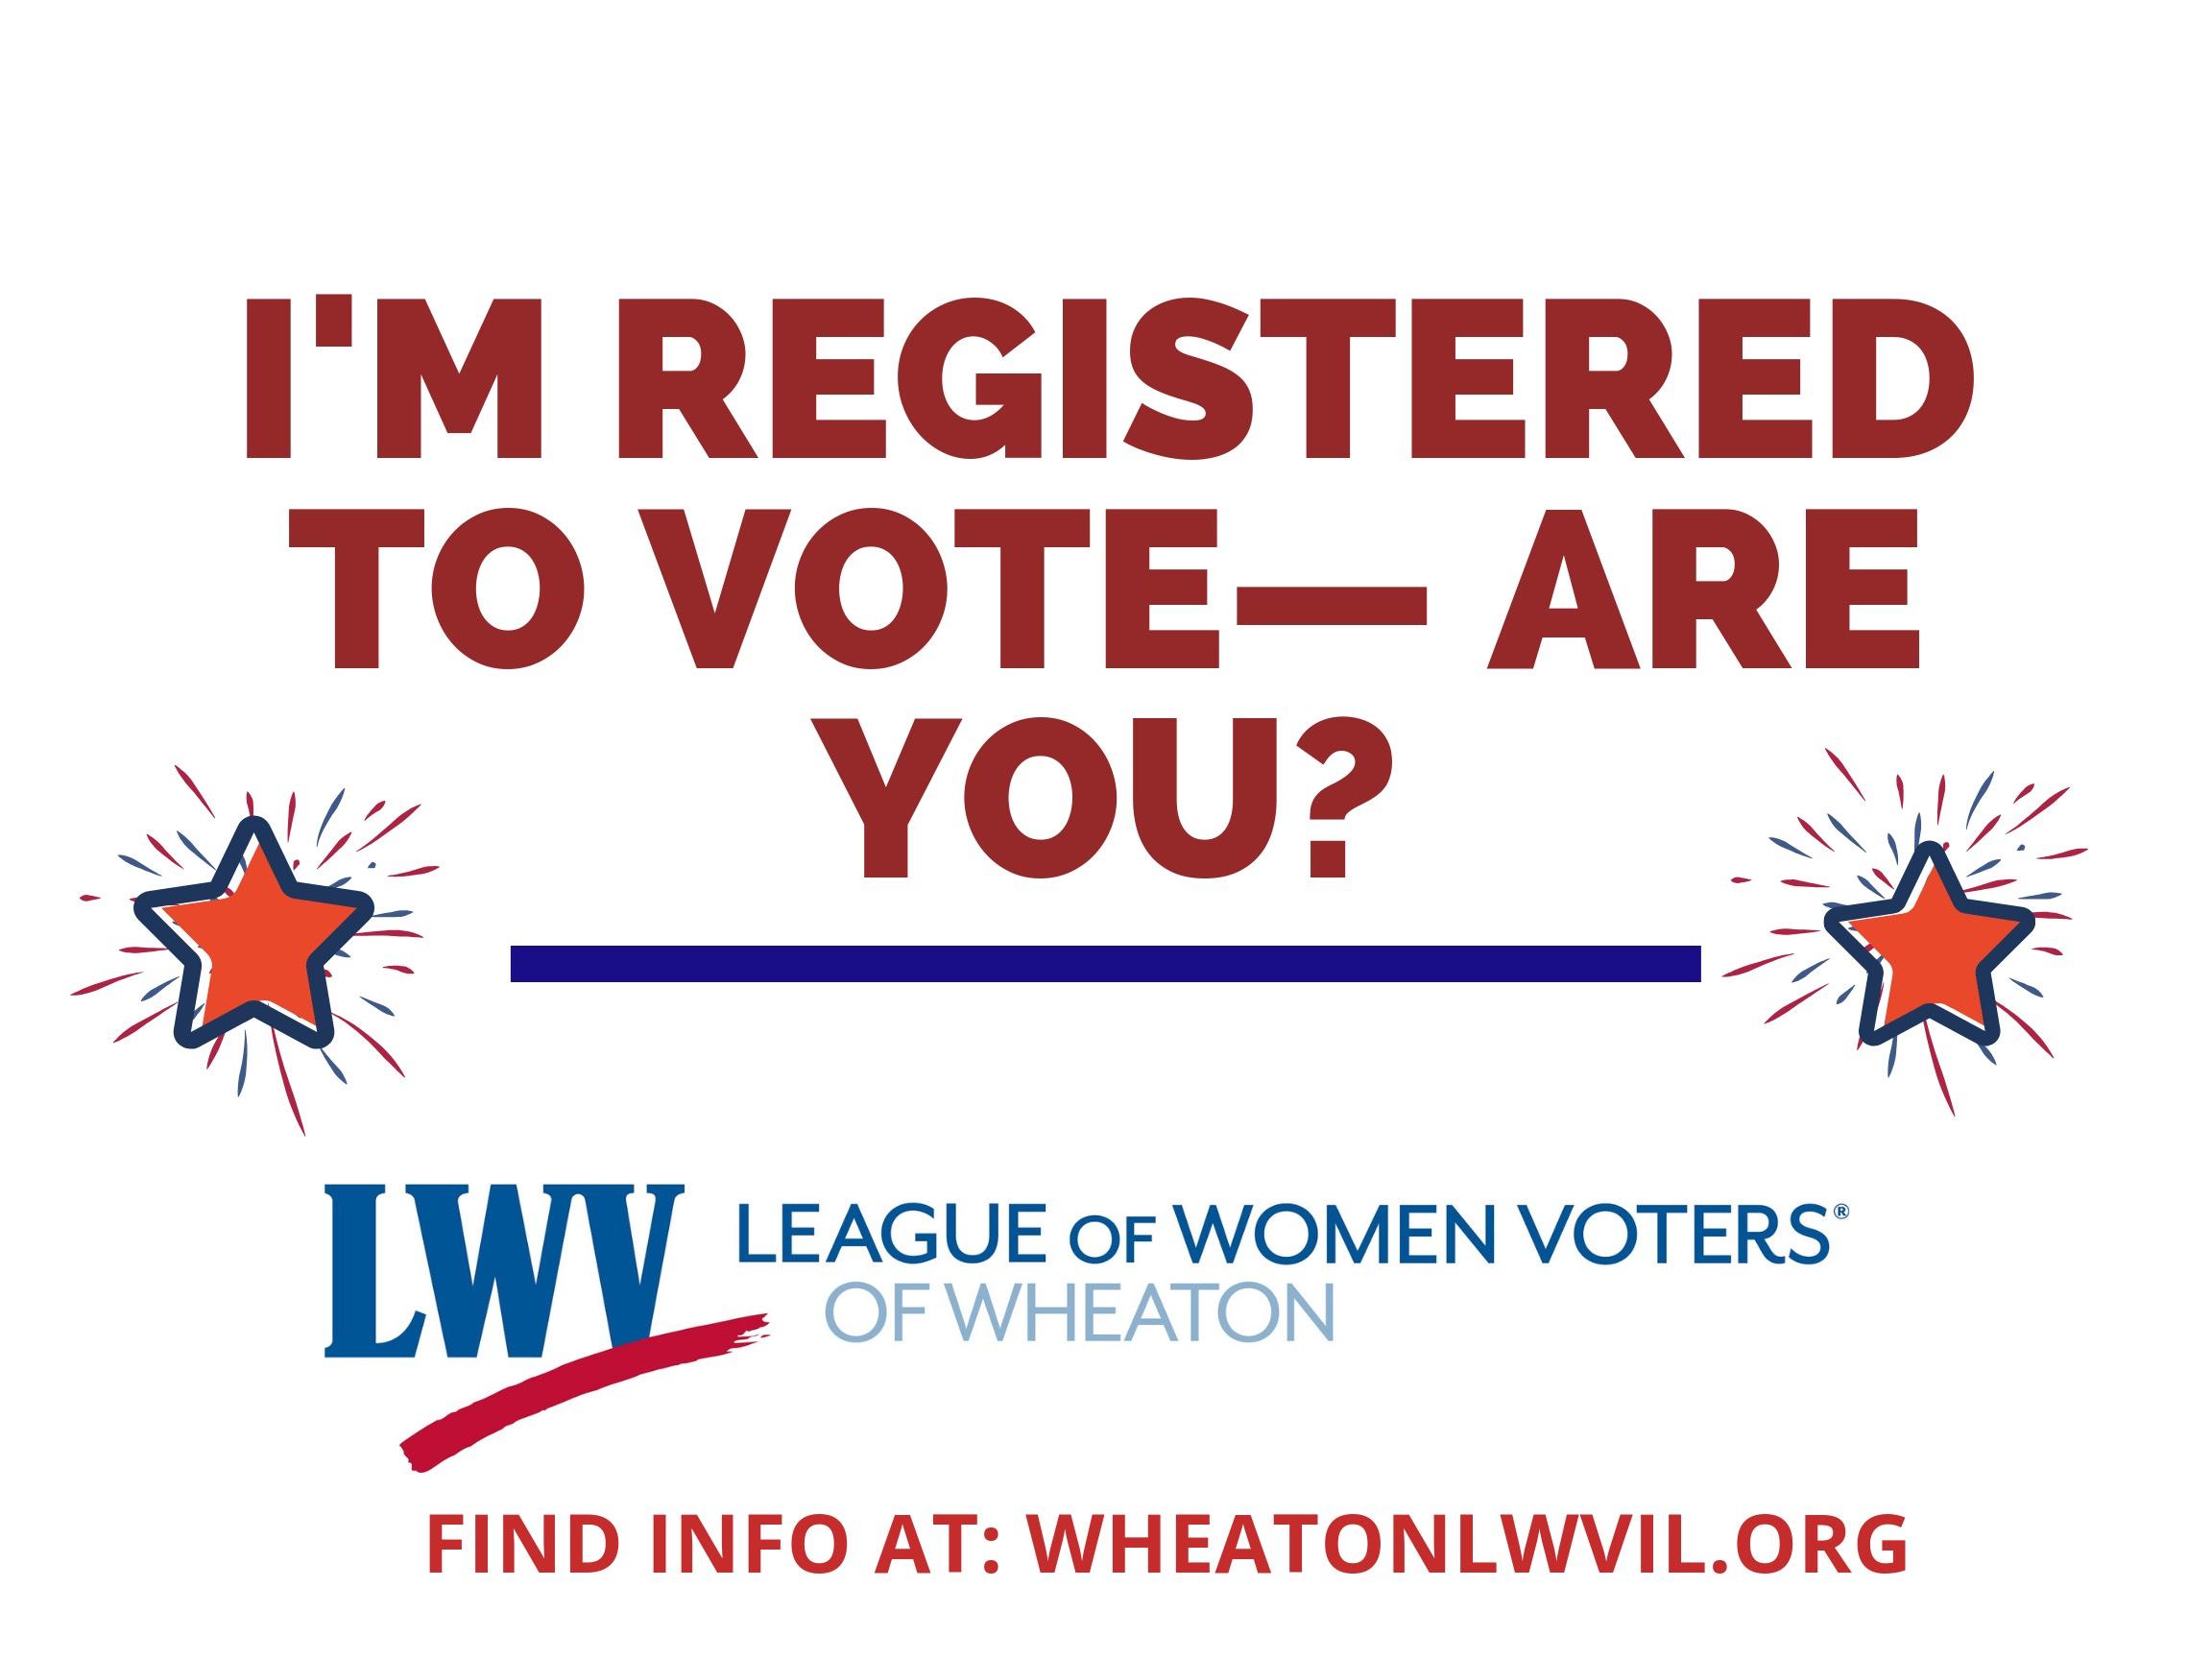 I'm registered to vote. Are you? Find info at wheatonlwvil.org